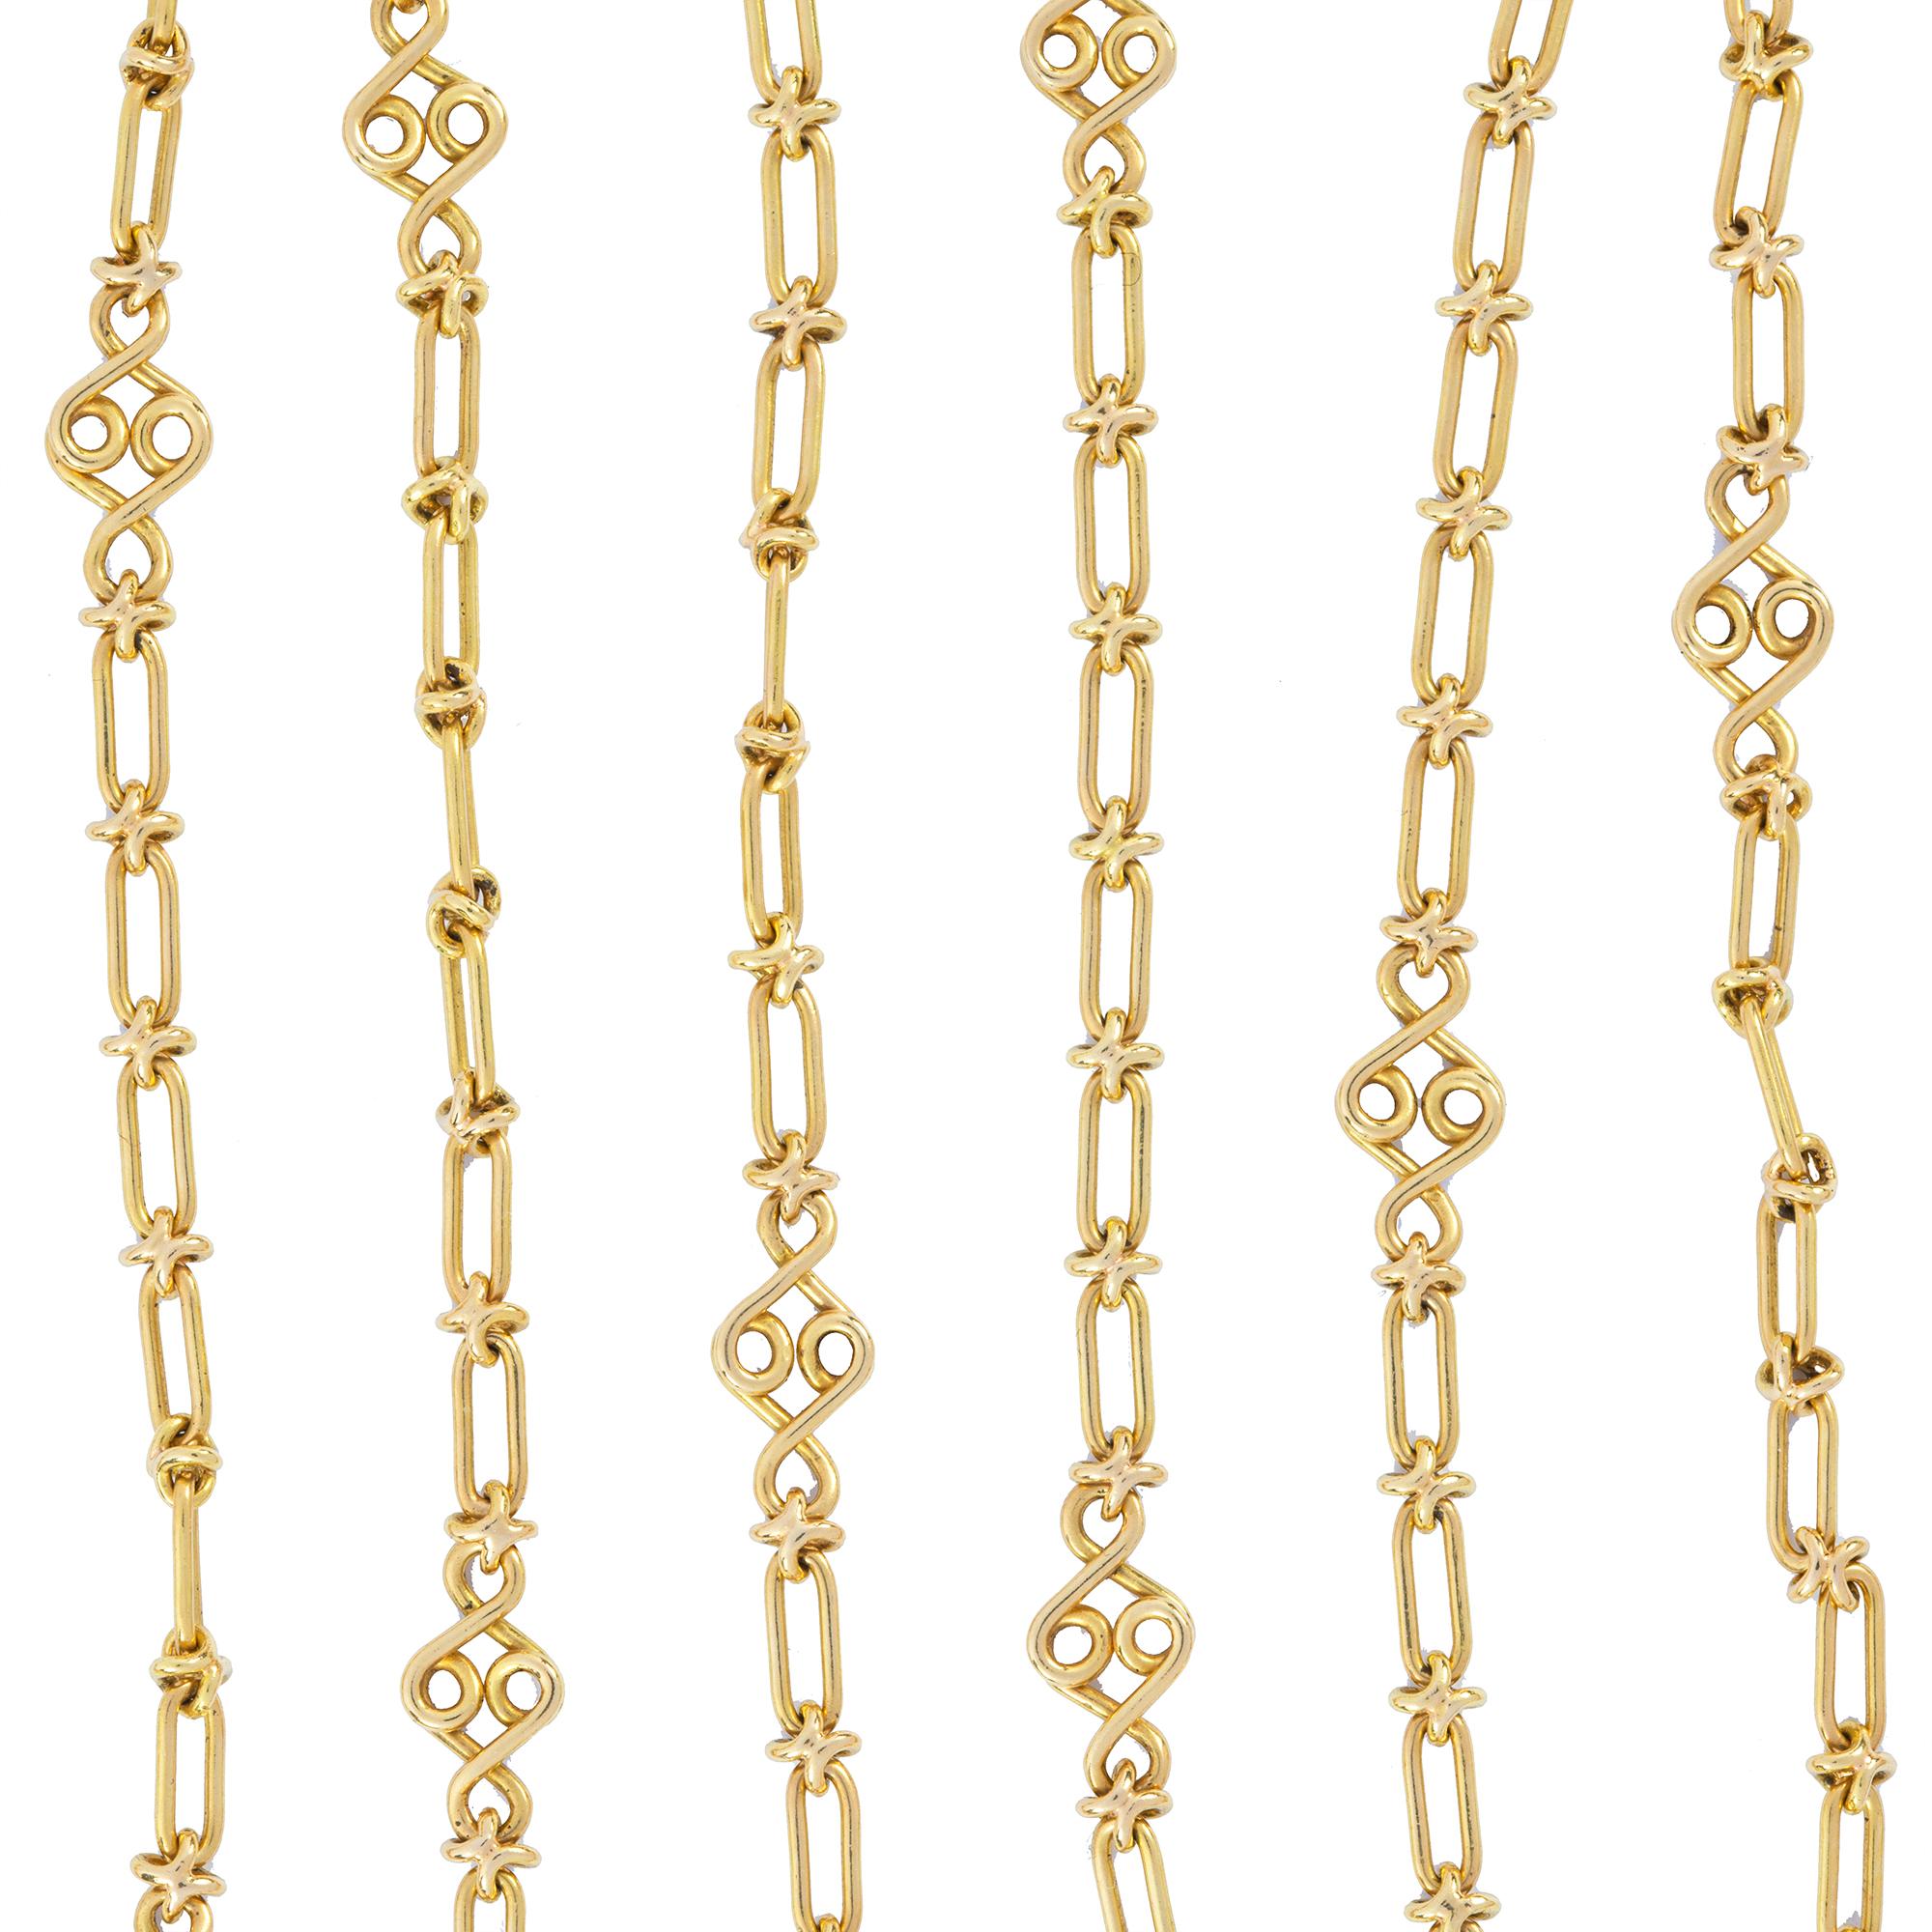 A handmade opera length Melody chain by Lucie Heskett-Brem the Gold Weaver of Lucerne, hallmarked 18ct gold, measuring approximately 157 x 0.6cm, gross weight 39.8 grams.

This substantial and dramatic chain necklace was made by Lucie Heskett-Brem,